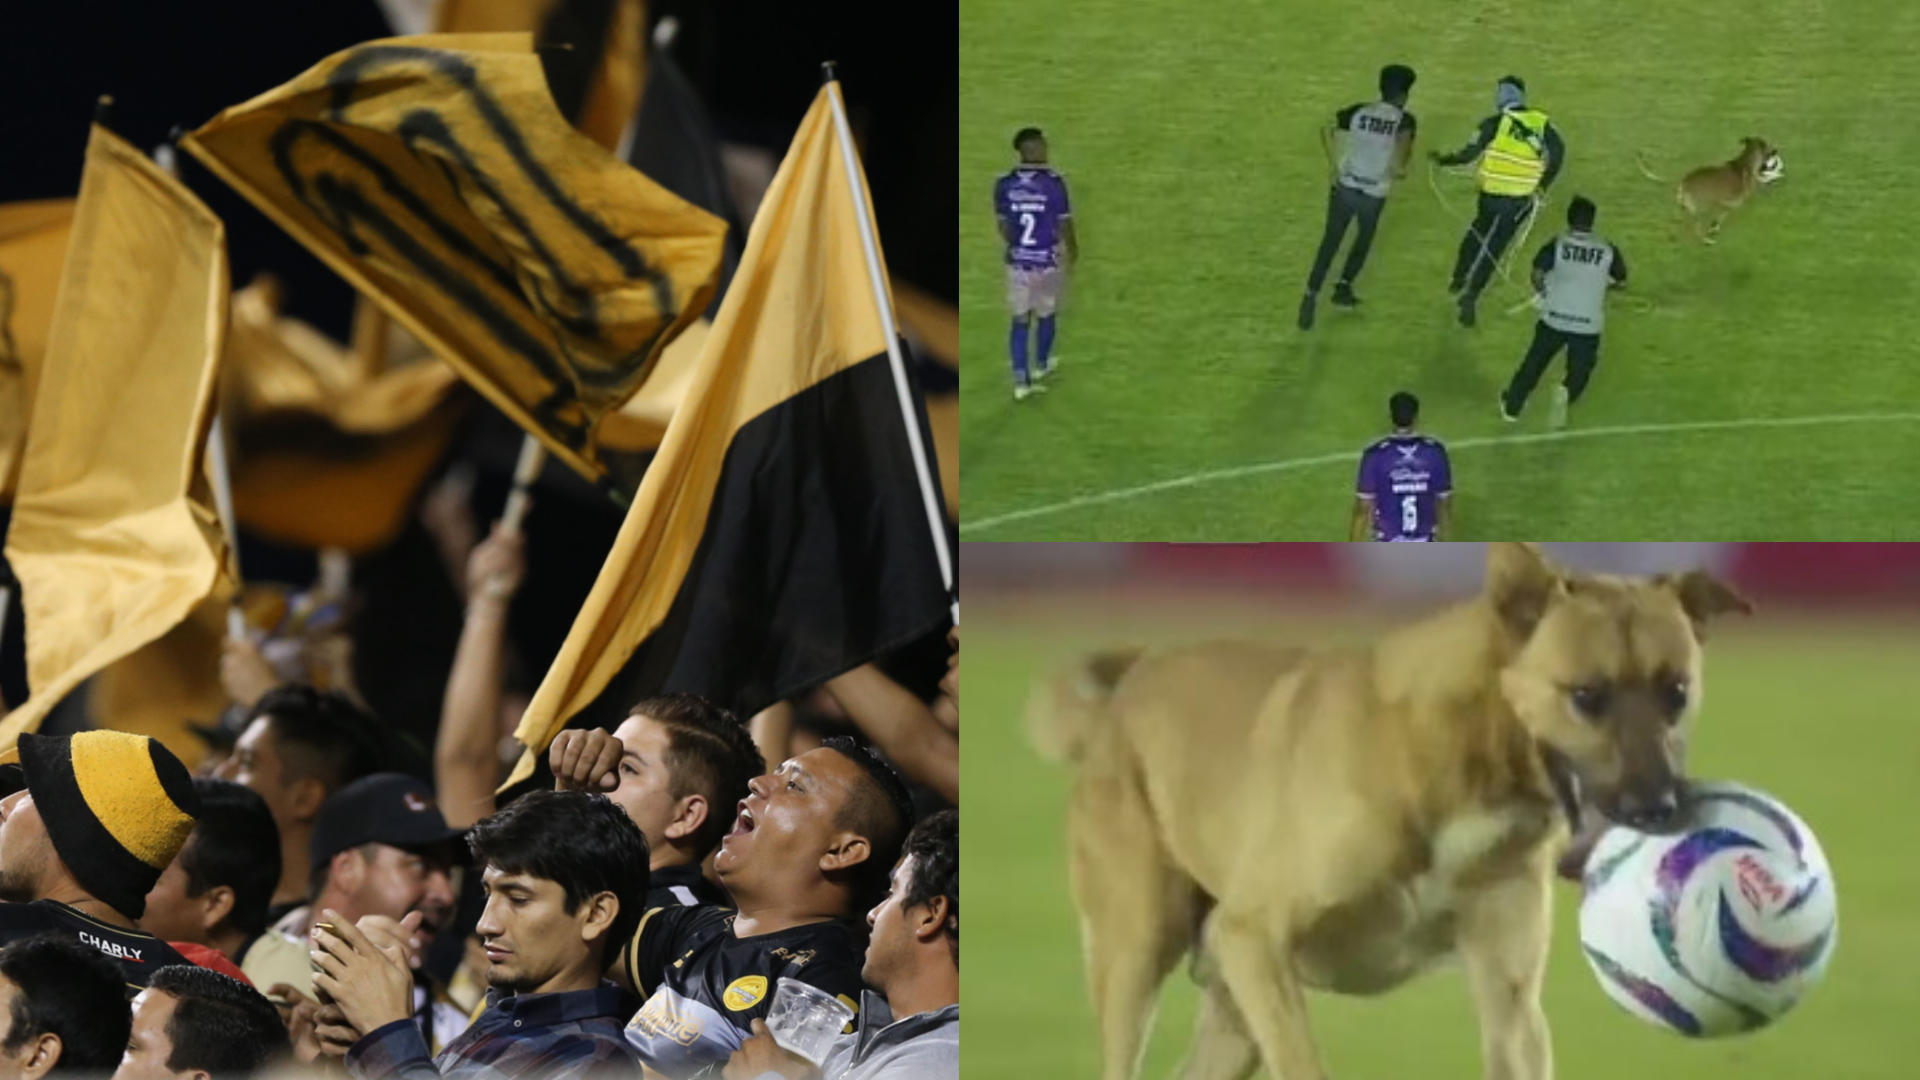 WATCH Mexican game involving club once managed by Diego Maradona halted by pitch-invading dog that steals the ball, runs off with it and cant be caught! Goal US